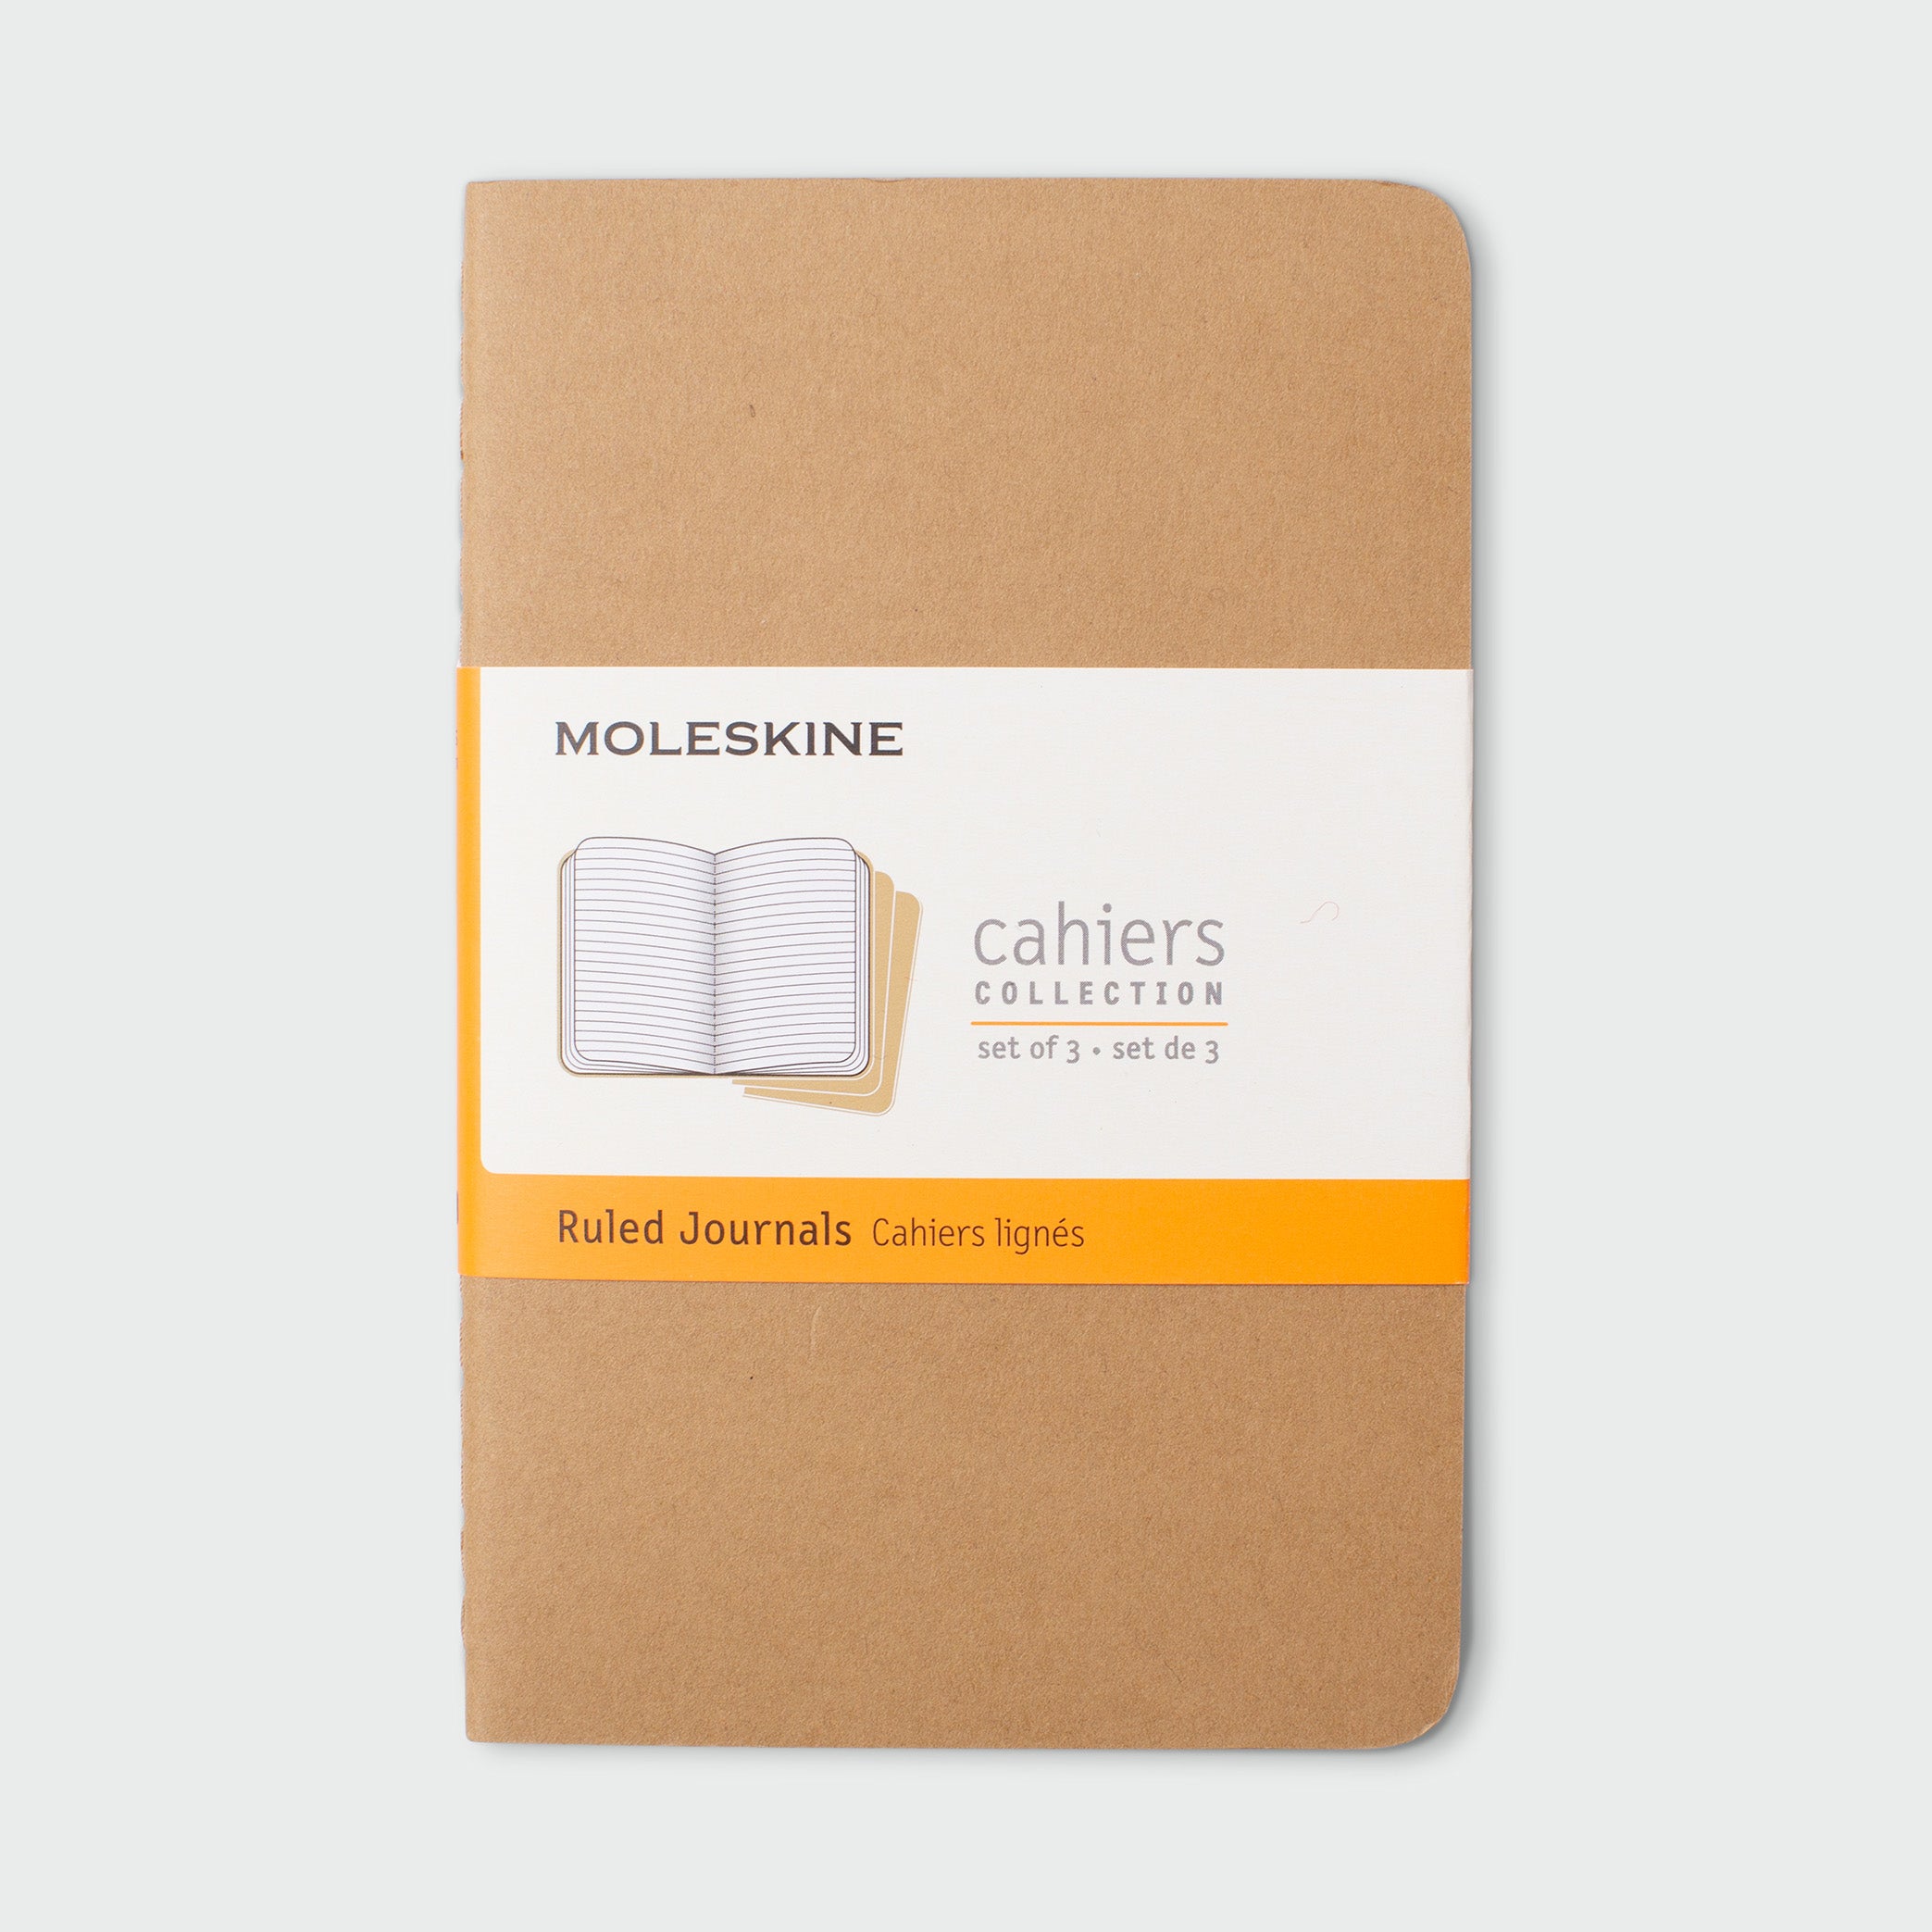 Moleskine Cahiers Collection Pocket Journal (Set of 3) - Ruled